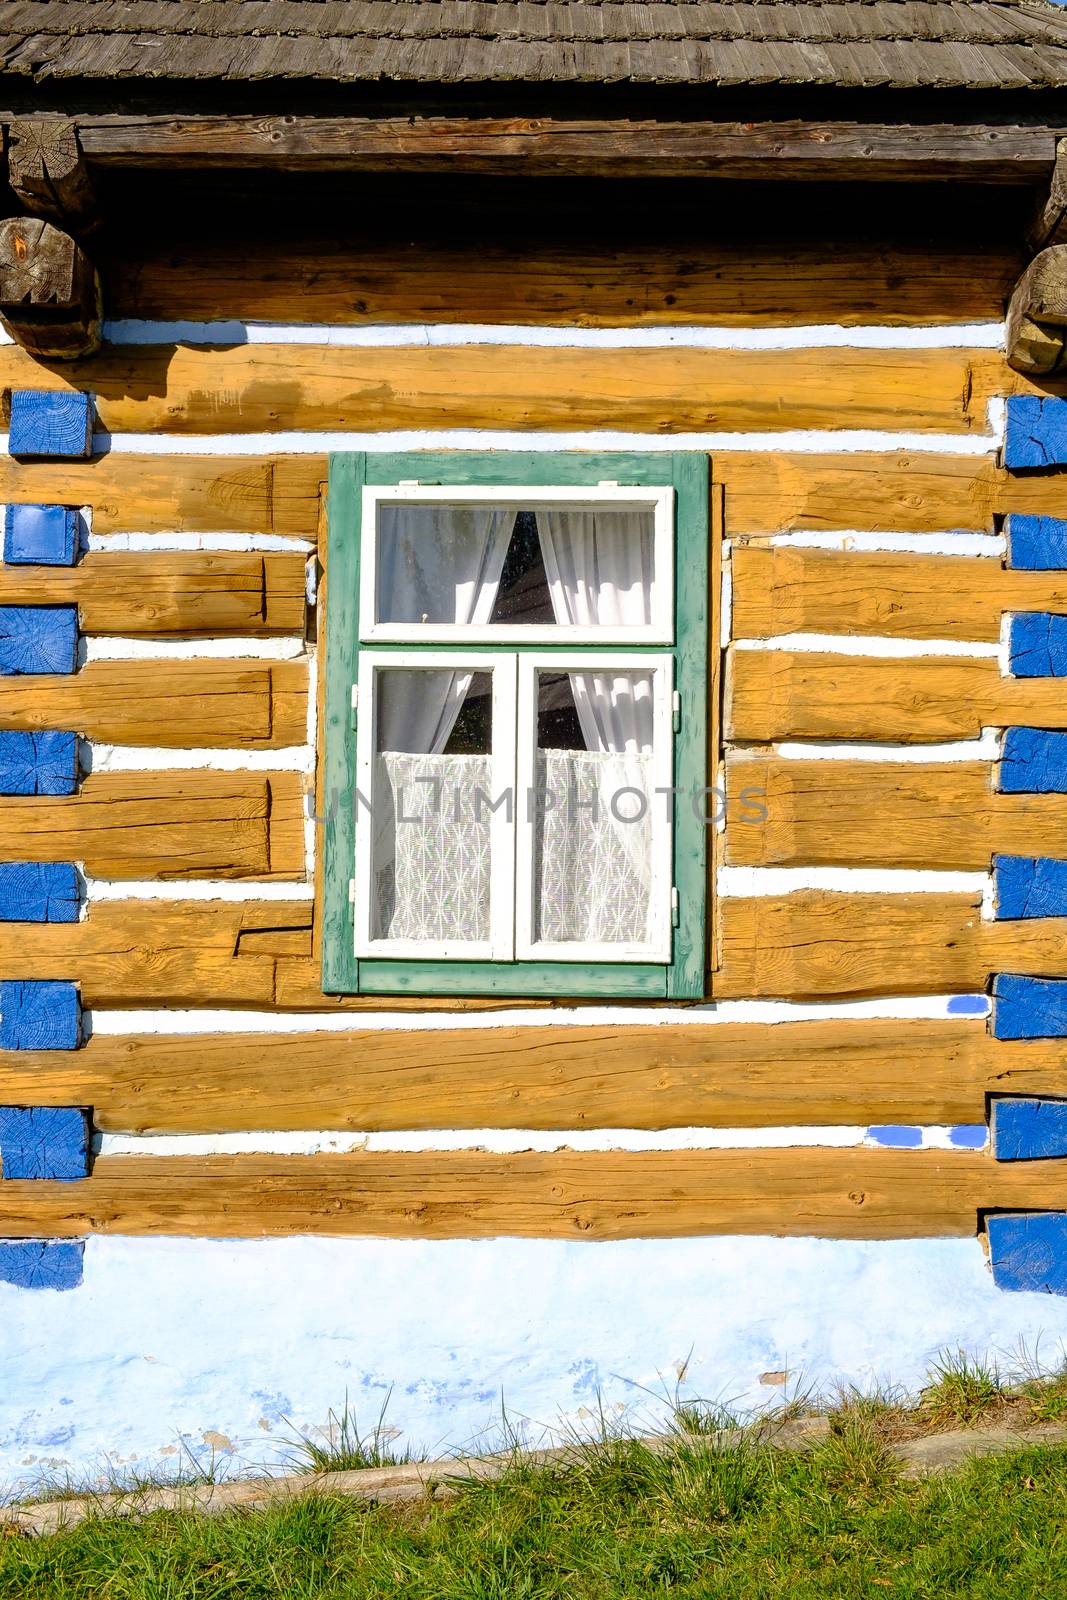 Detail view of old traditional colorful wooden house and window, Stara Lubovna, Slovakia, Eastern Europe